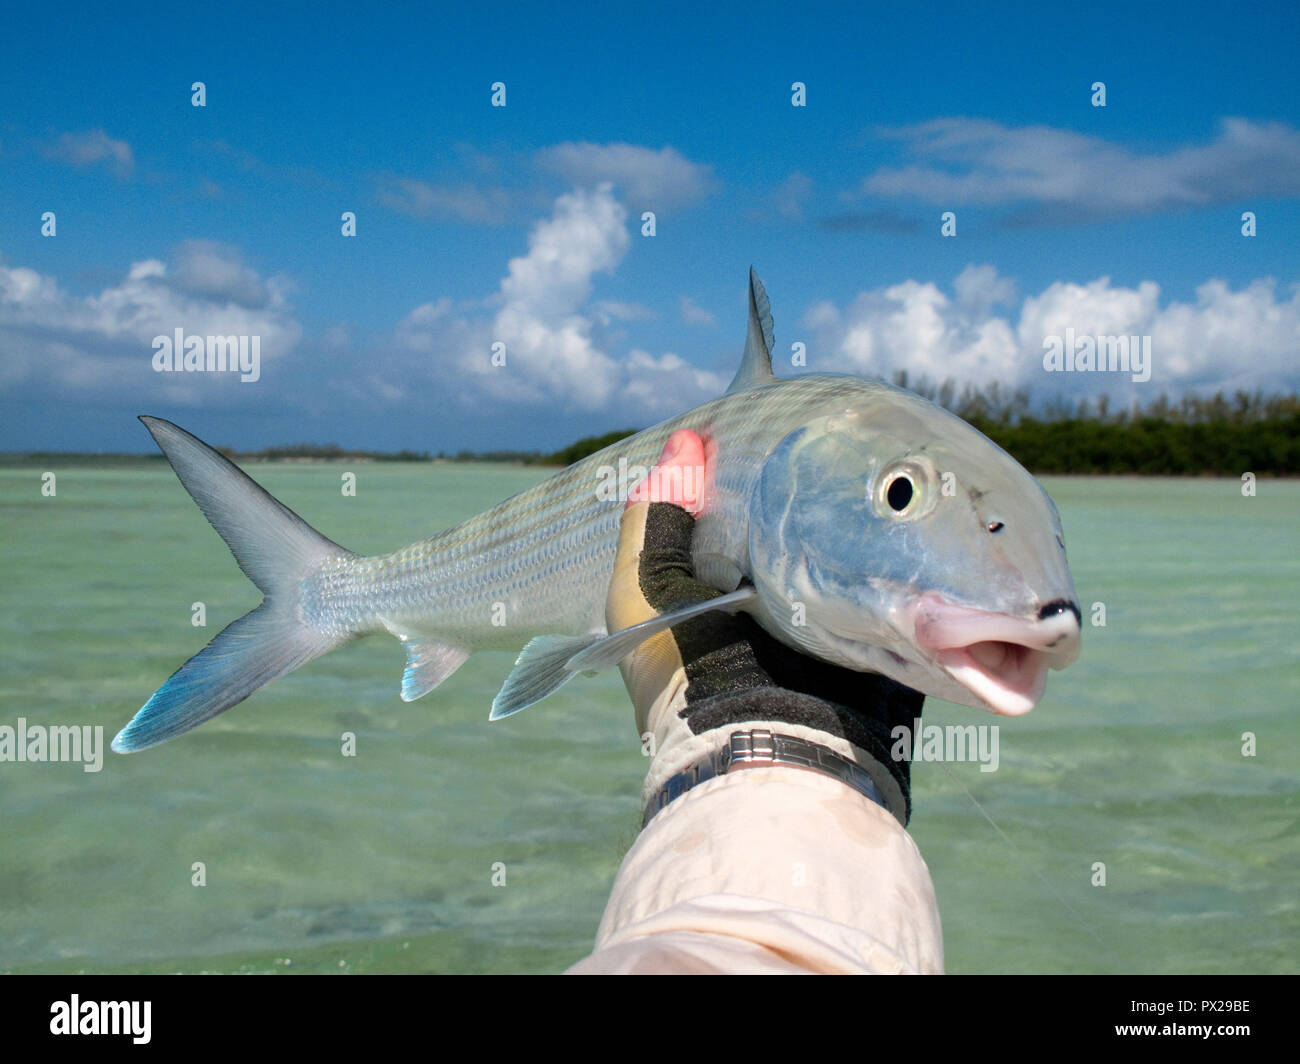 Fly fishing for bonefish on shallow saltwater flats in the Bahamas. Stock Photo